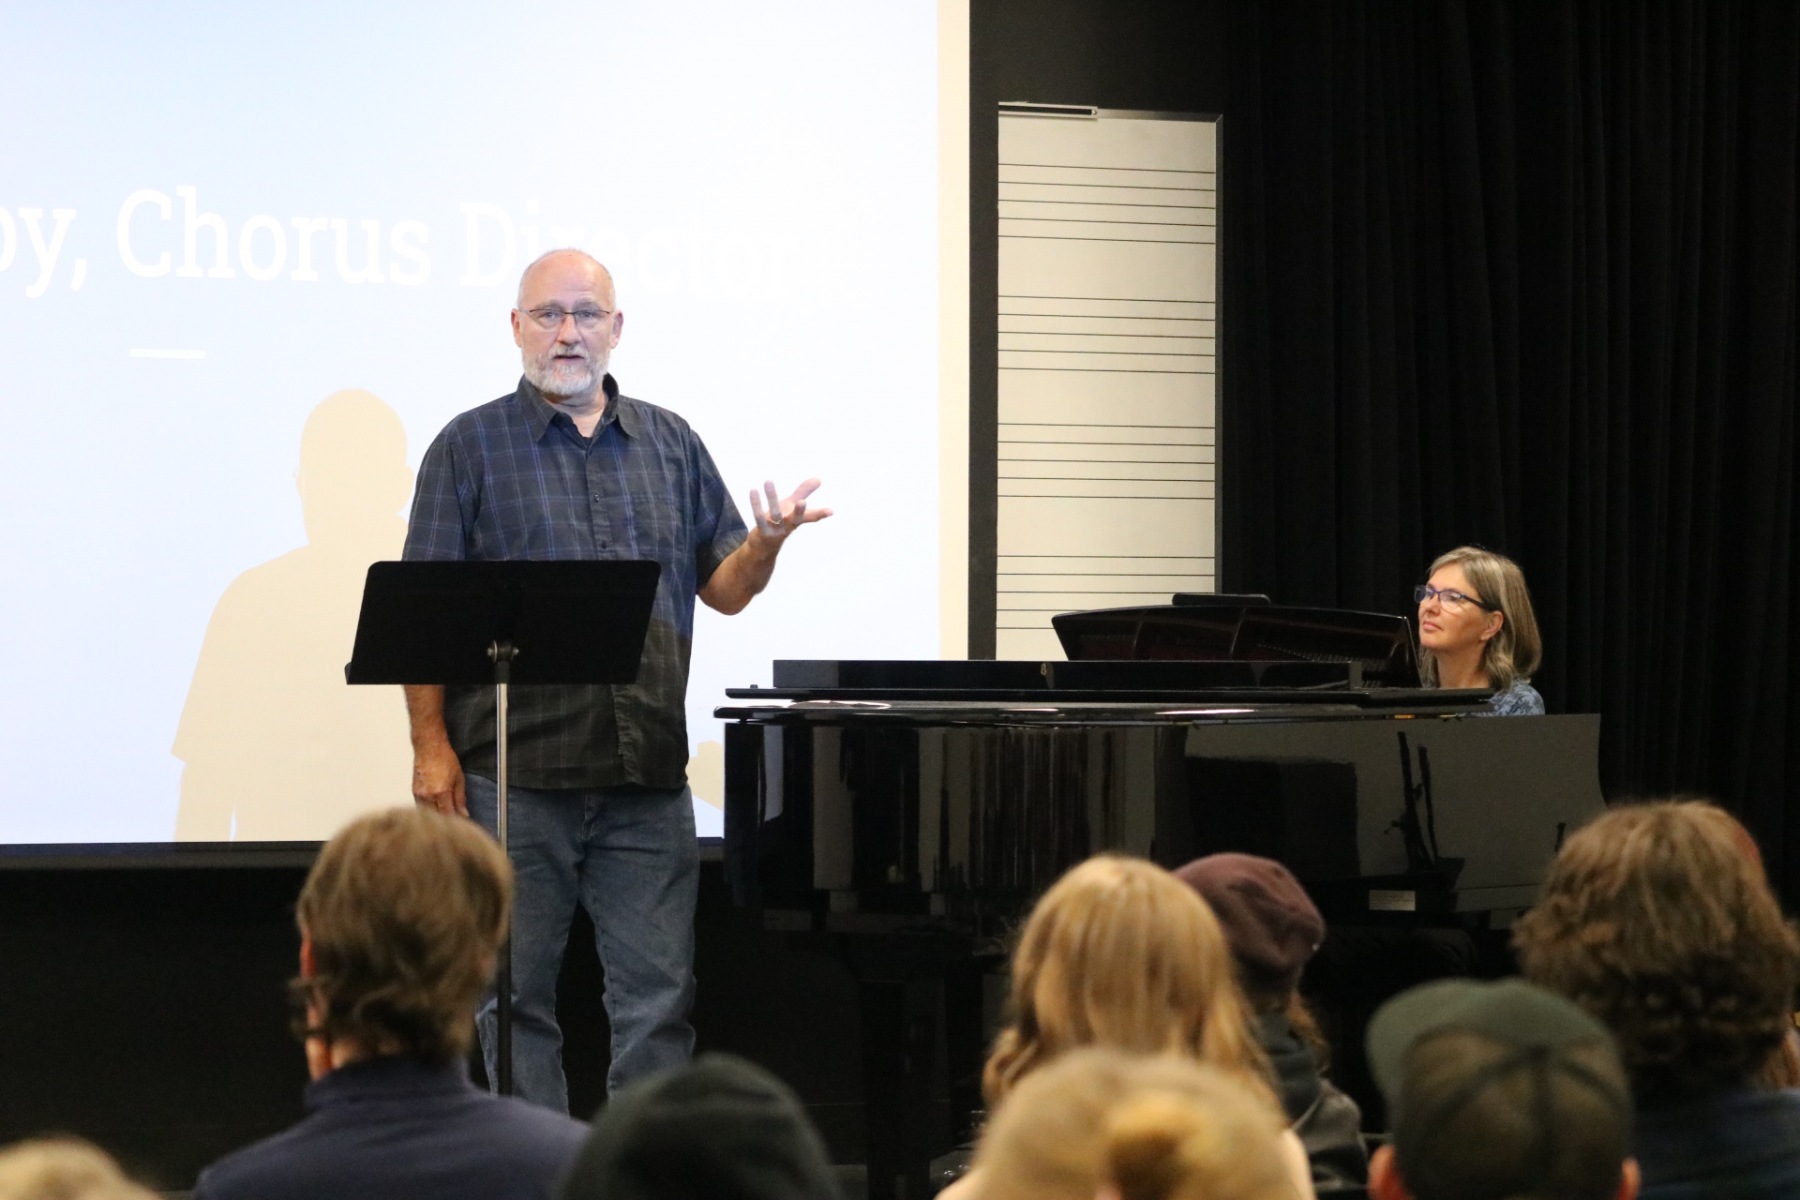 Desautels alumnus Steve Denby explains the community-building process  used for the chorus of Li Keur: Riel's Heart of the North, during a behind-the-scenes glimpse for Desautels Faculty of Music students.